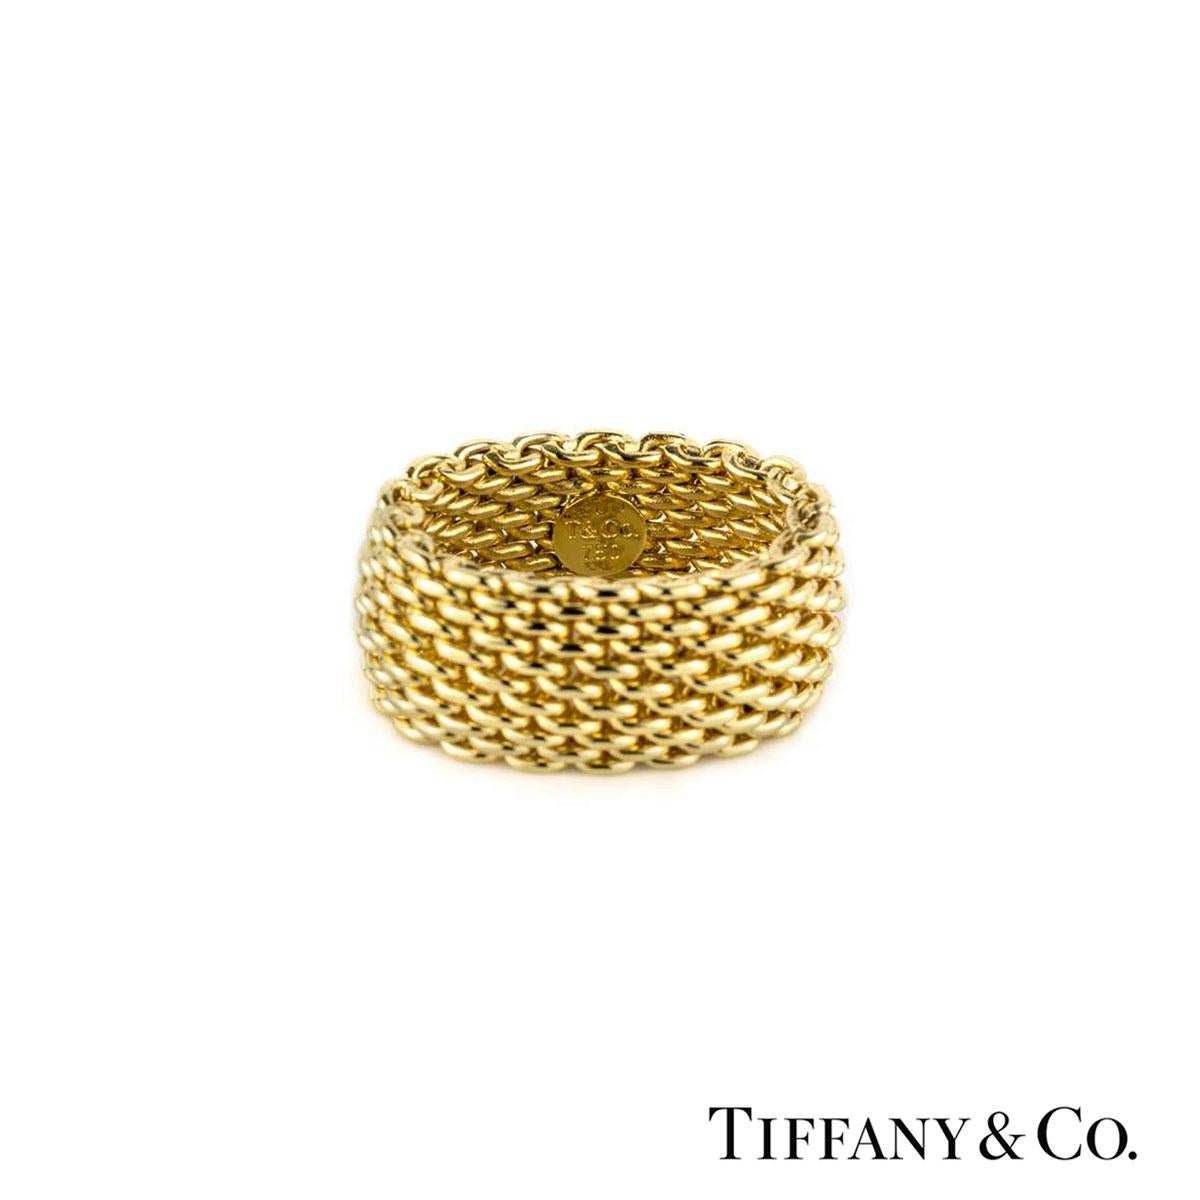 A unique 18k yellow gold Tiffany & Co. ring from the Somerset collection. The ring is made up 6 rows of intertwined woven links. The ring measures 10mm in width and is flexible. The ring is a size UK K, EU 50 and US 5 1⁄4 and has a gross weight of